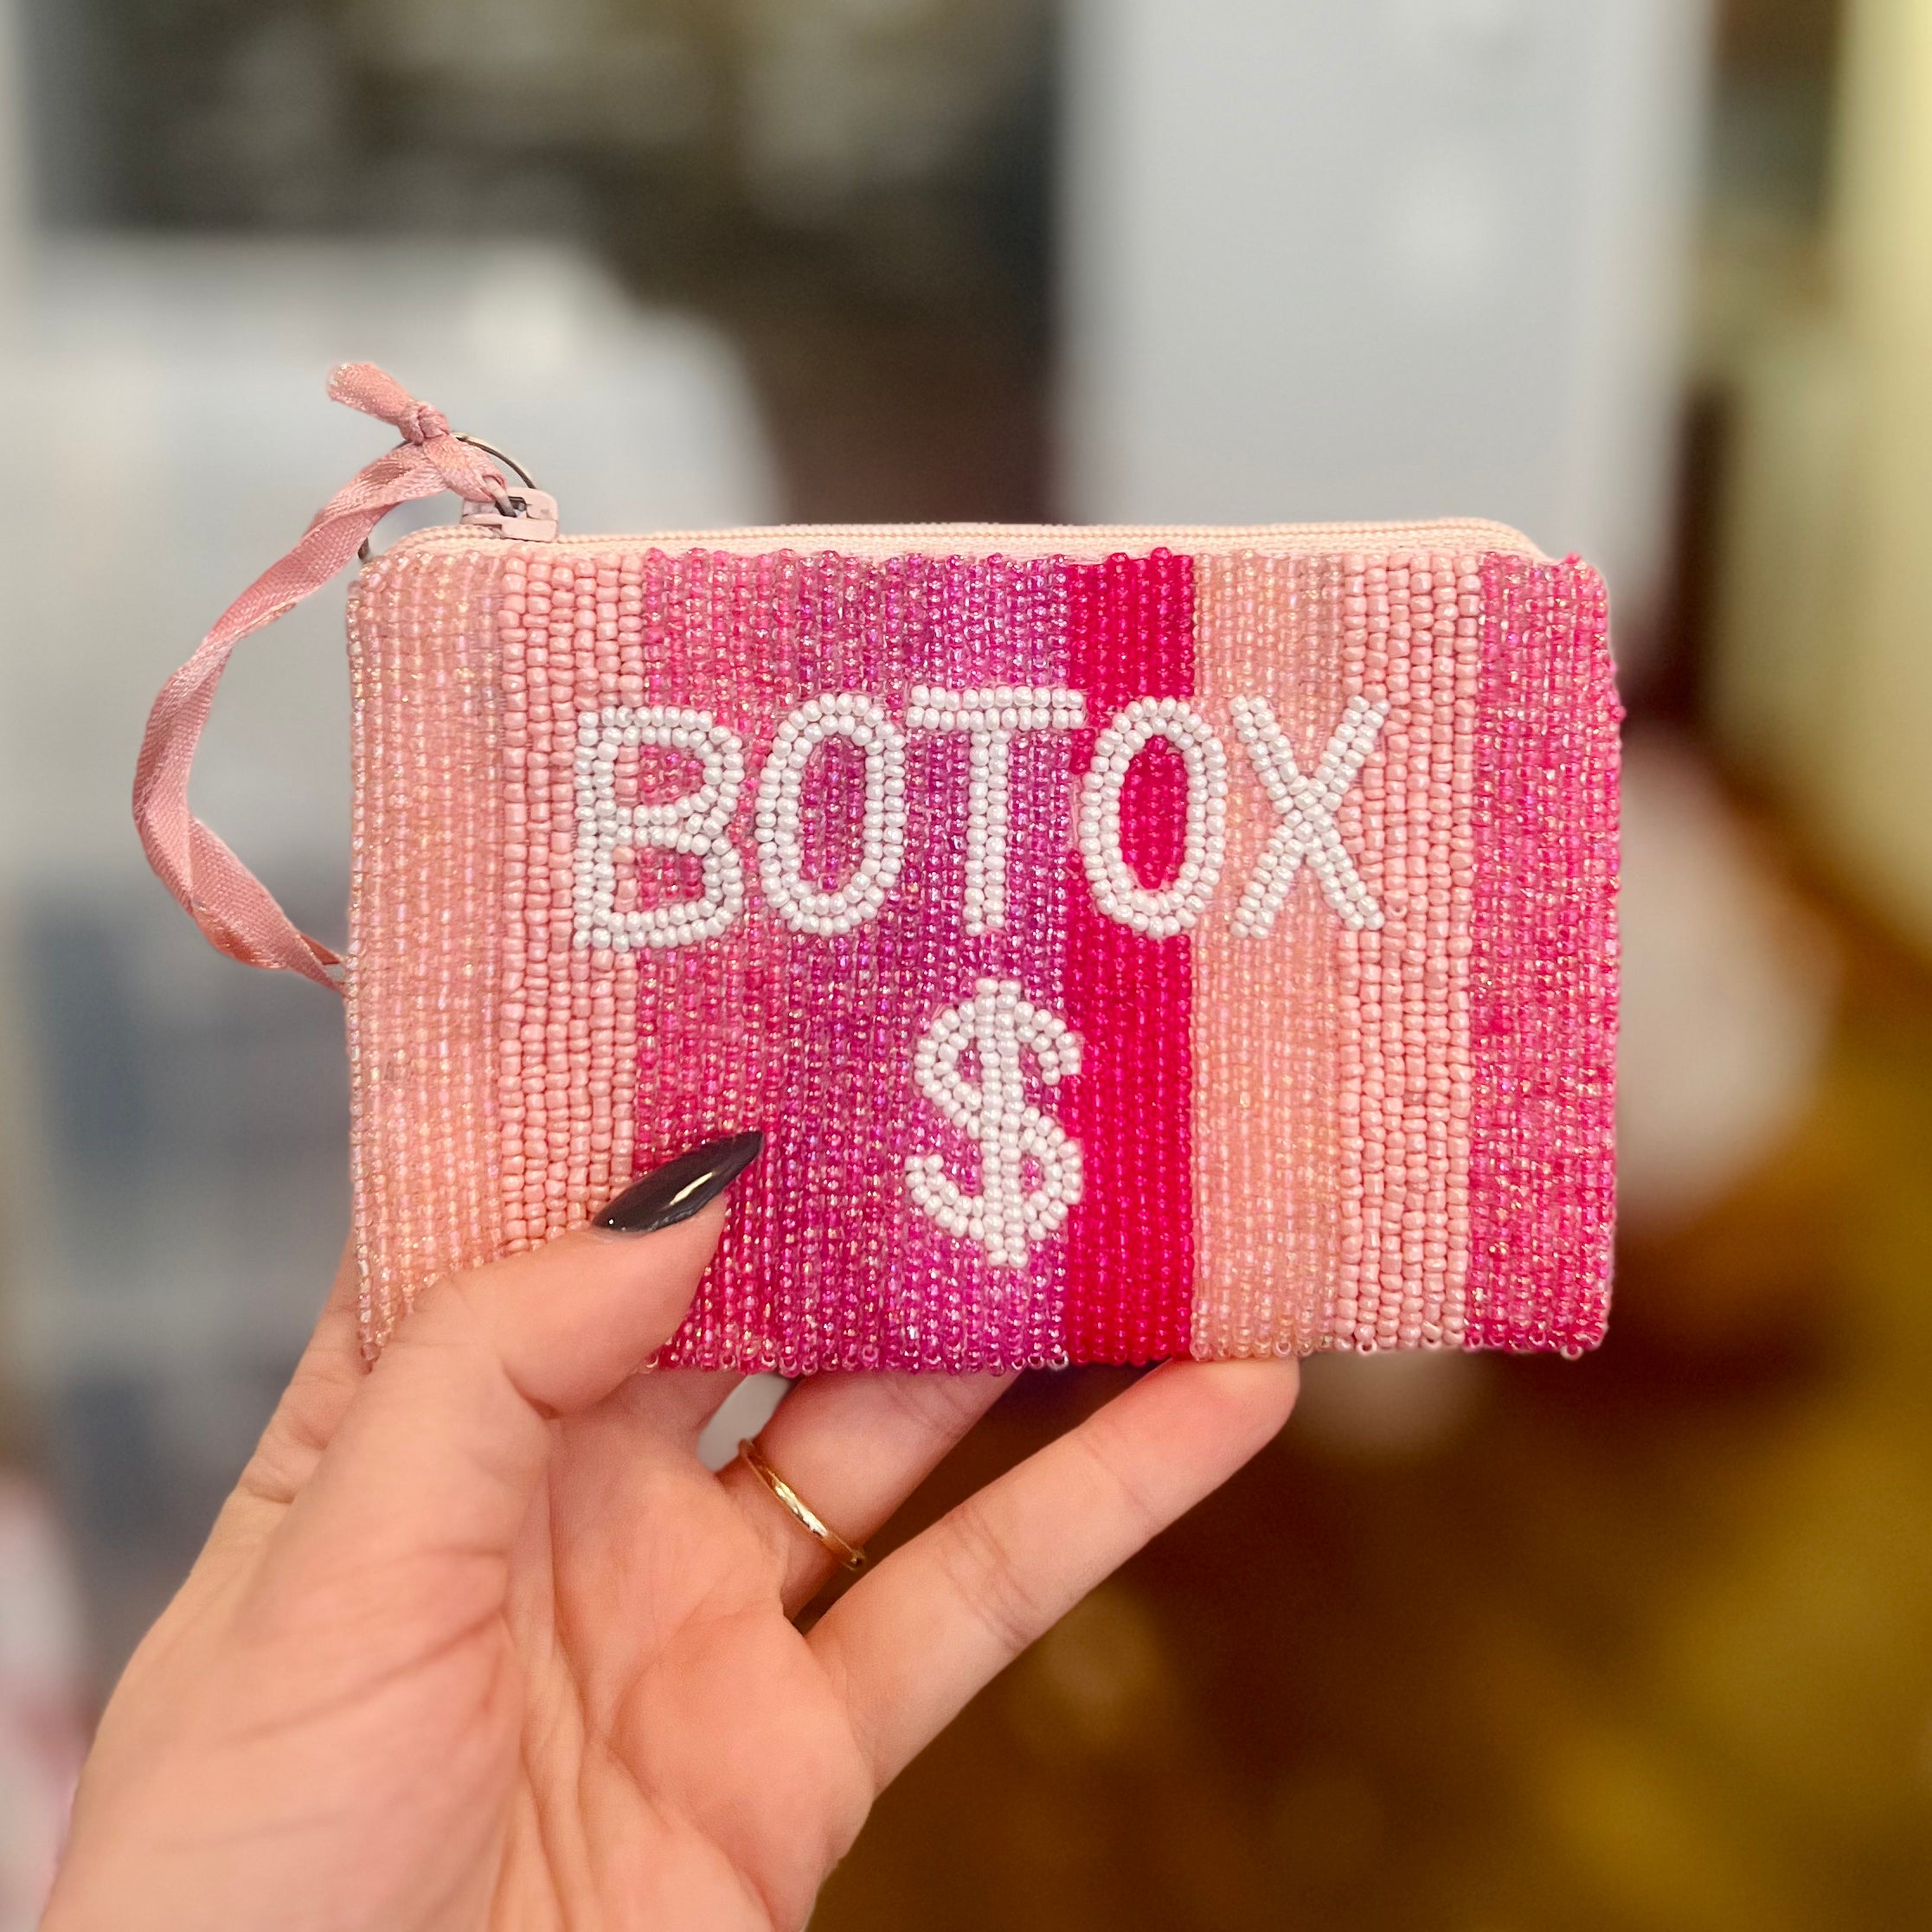 Botox $ Beaded Pouch